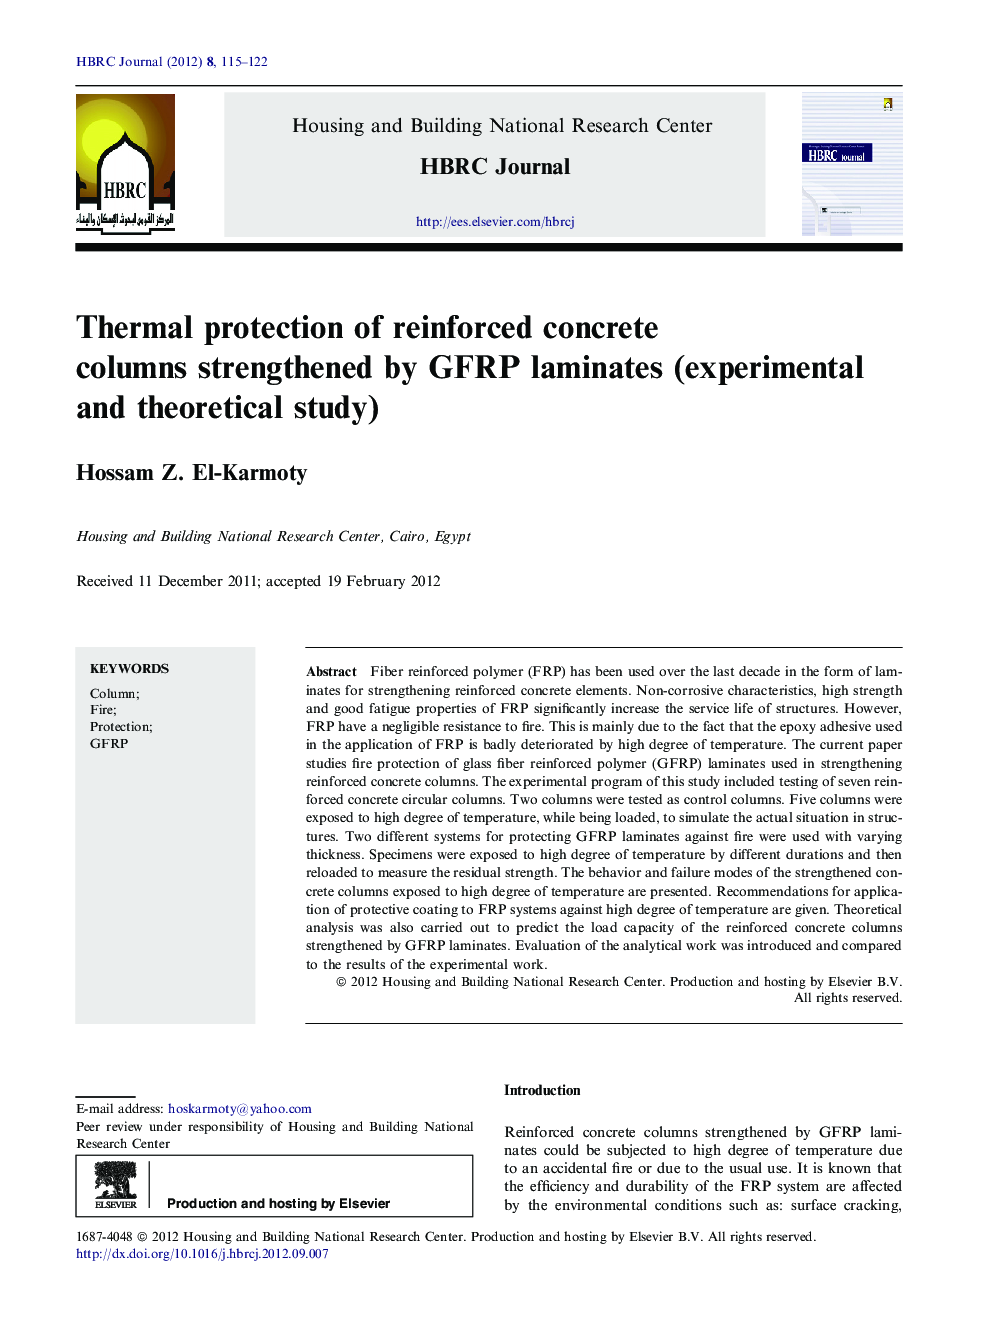 Thermal protection of reinforced concrete columns strengthened by GFRP laminates (experimental and theoretical study) 